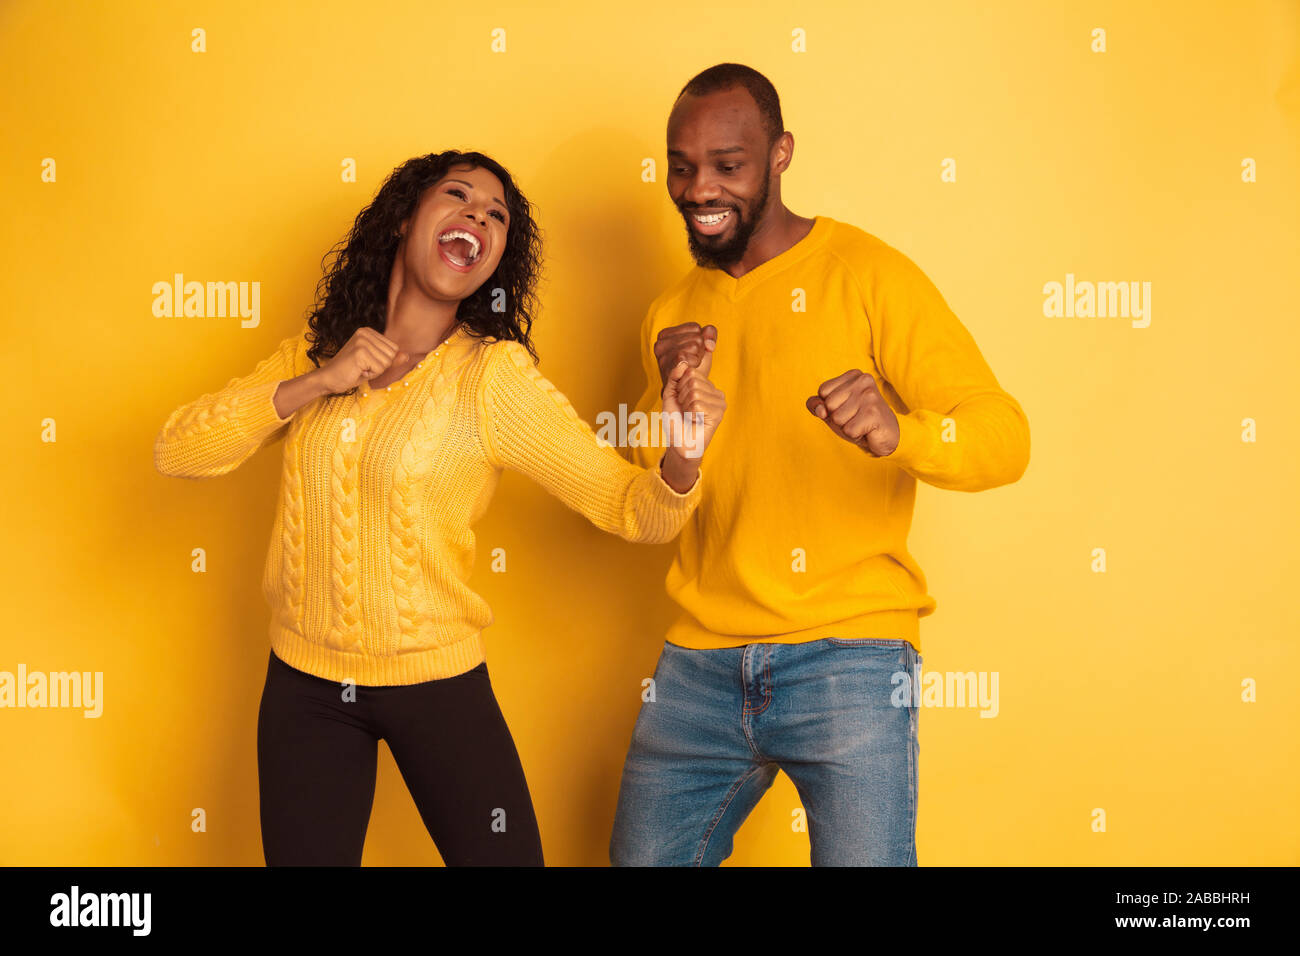 Young emotional african-american man and woman in bright casual clothes on yellow background. Beautiful couple. Concept of human emotions, facial expession, relations, ad. Dancing and singing. Stock Photo